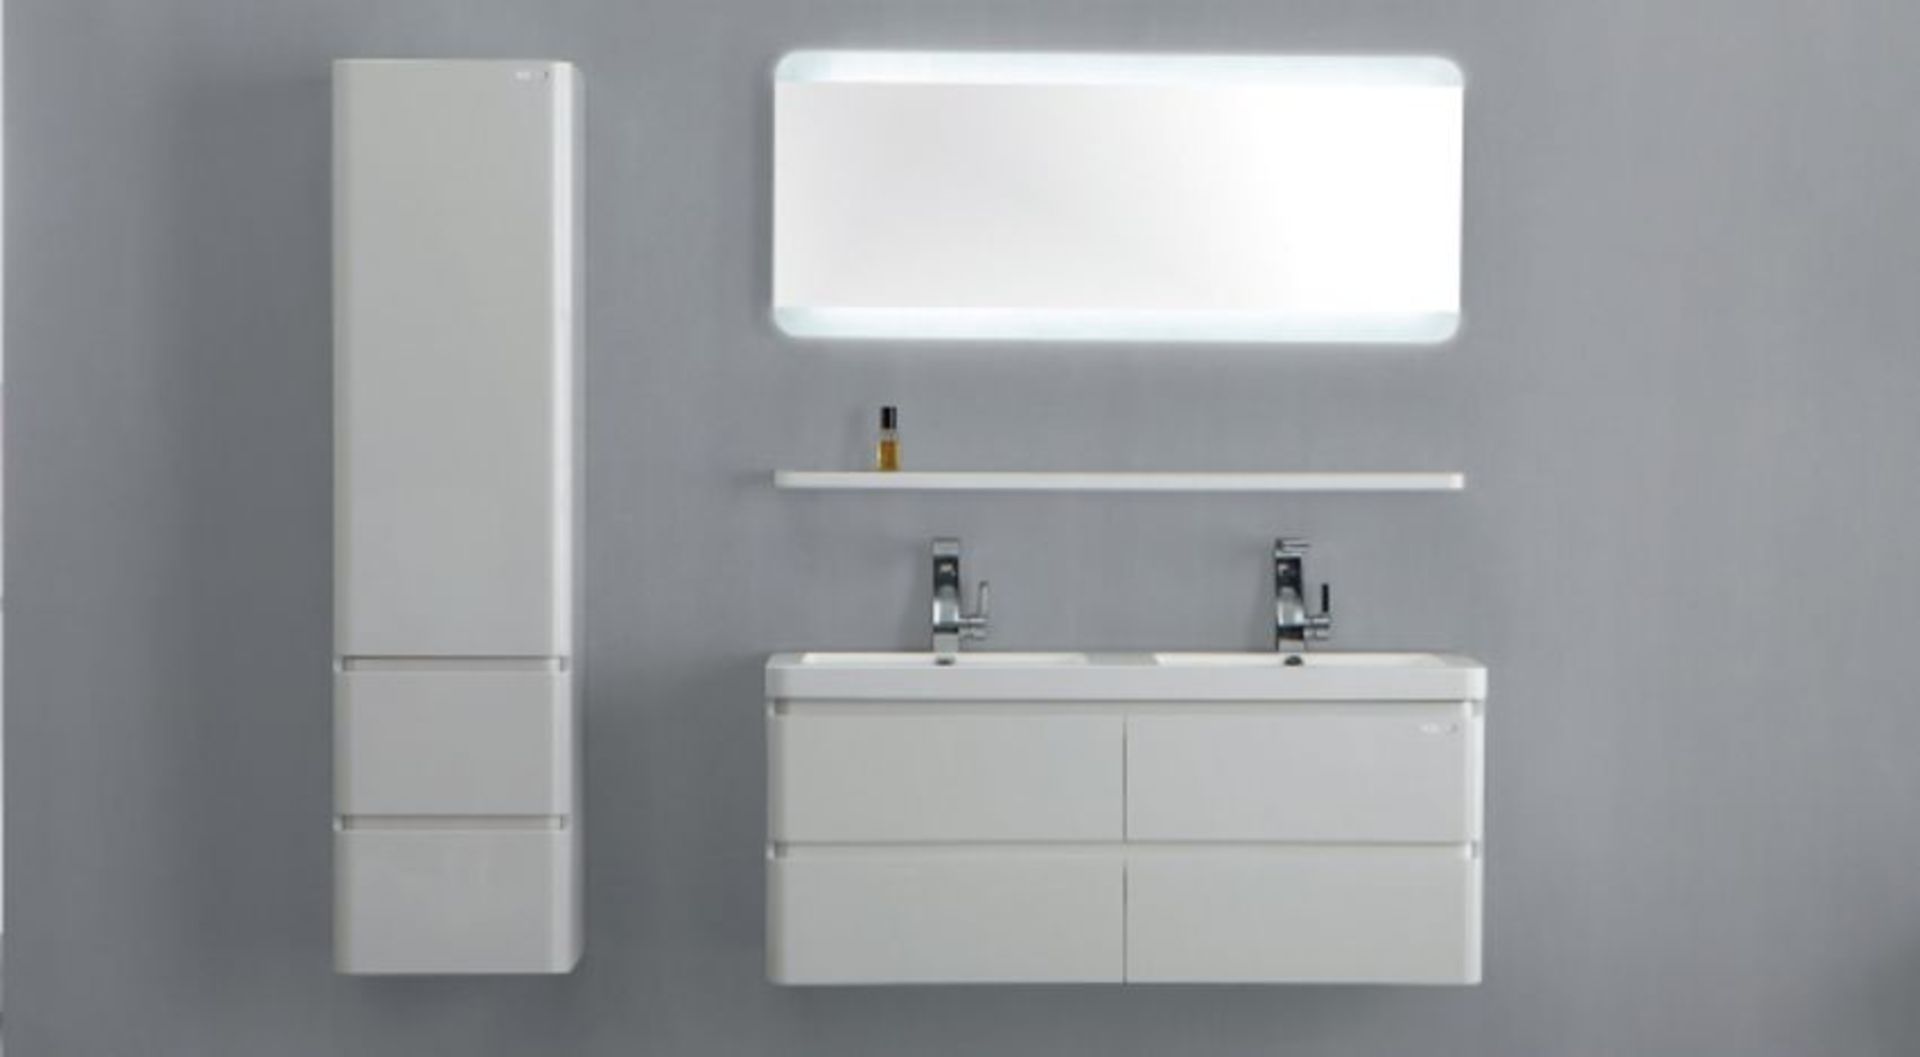 1 x Austin Bathrooms EDGE Backlit 1200mm Illuminated Wall Mirror With No Touch Sensors, Rounds Edges - Image 2 of 3